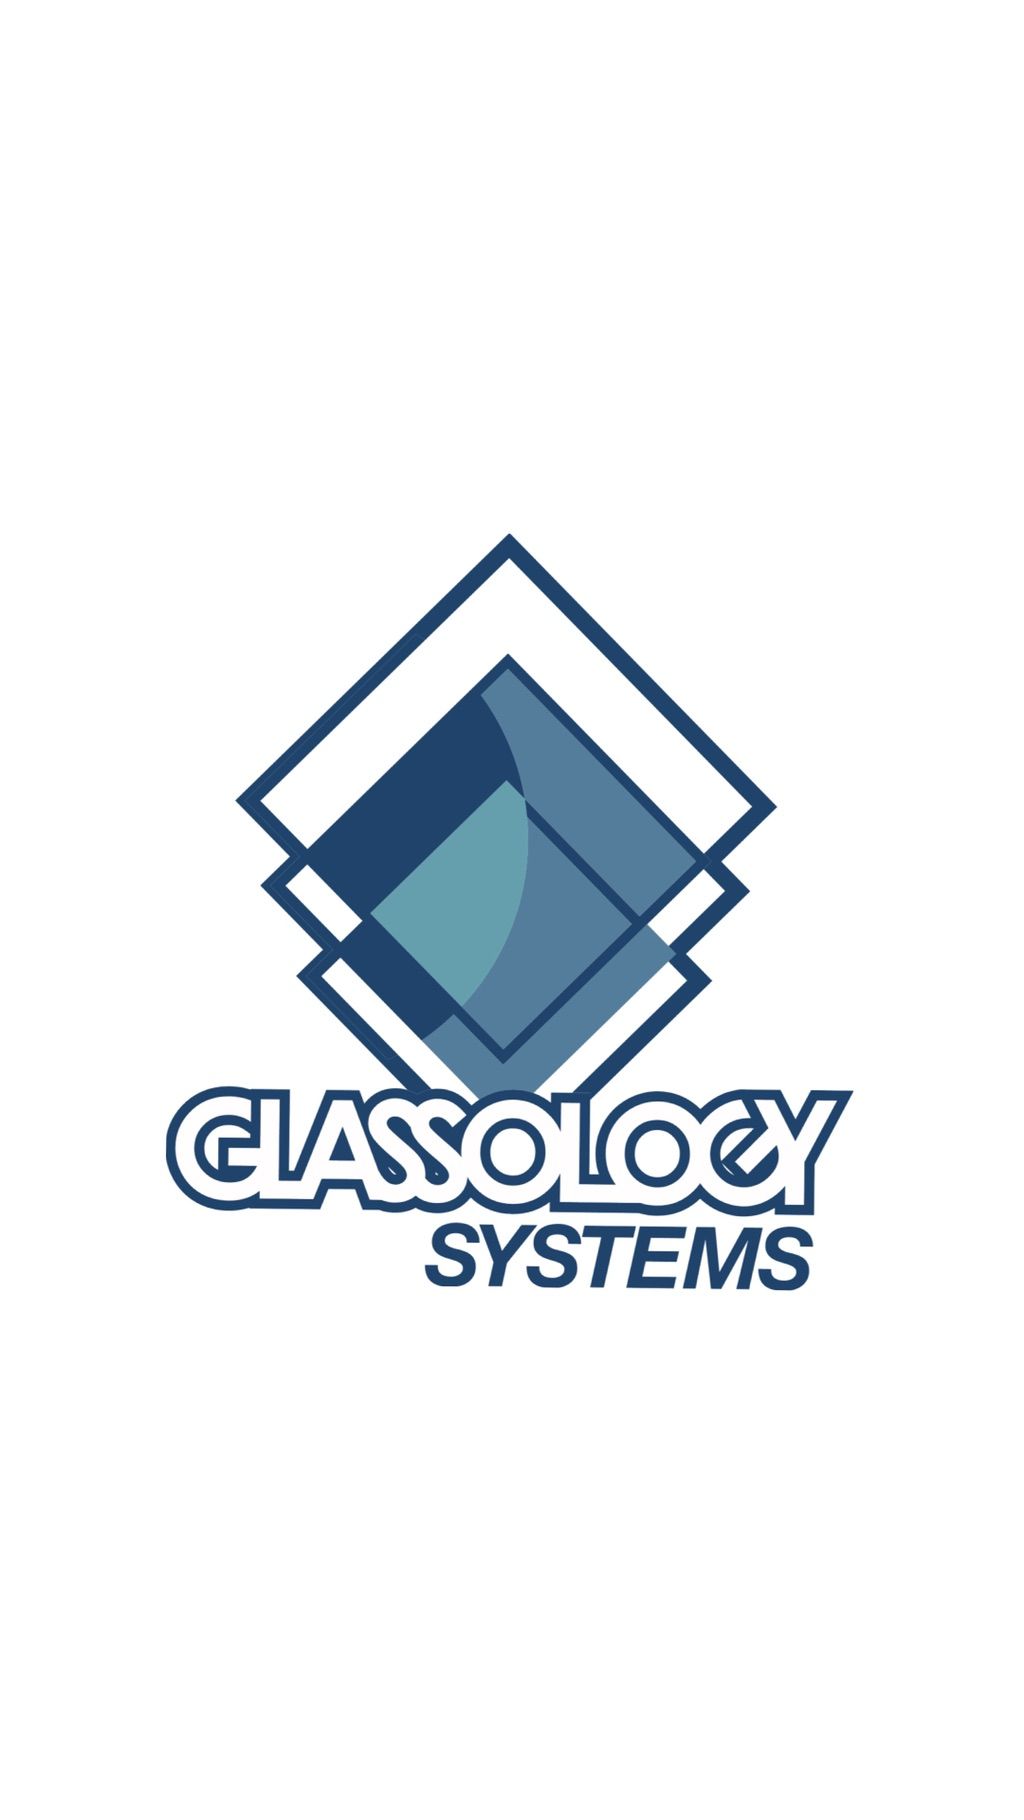 GLASSOLOGY SYSTEMS